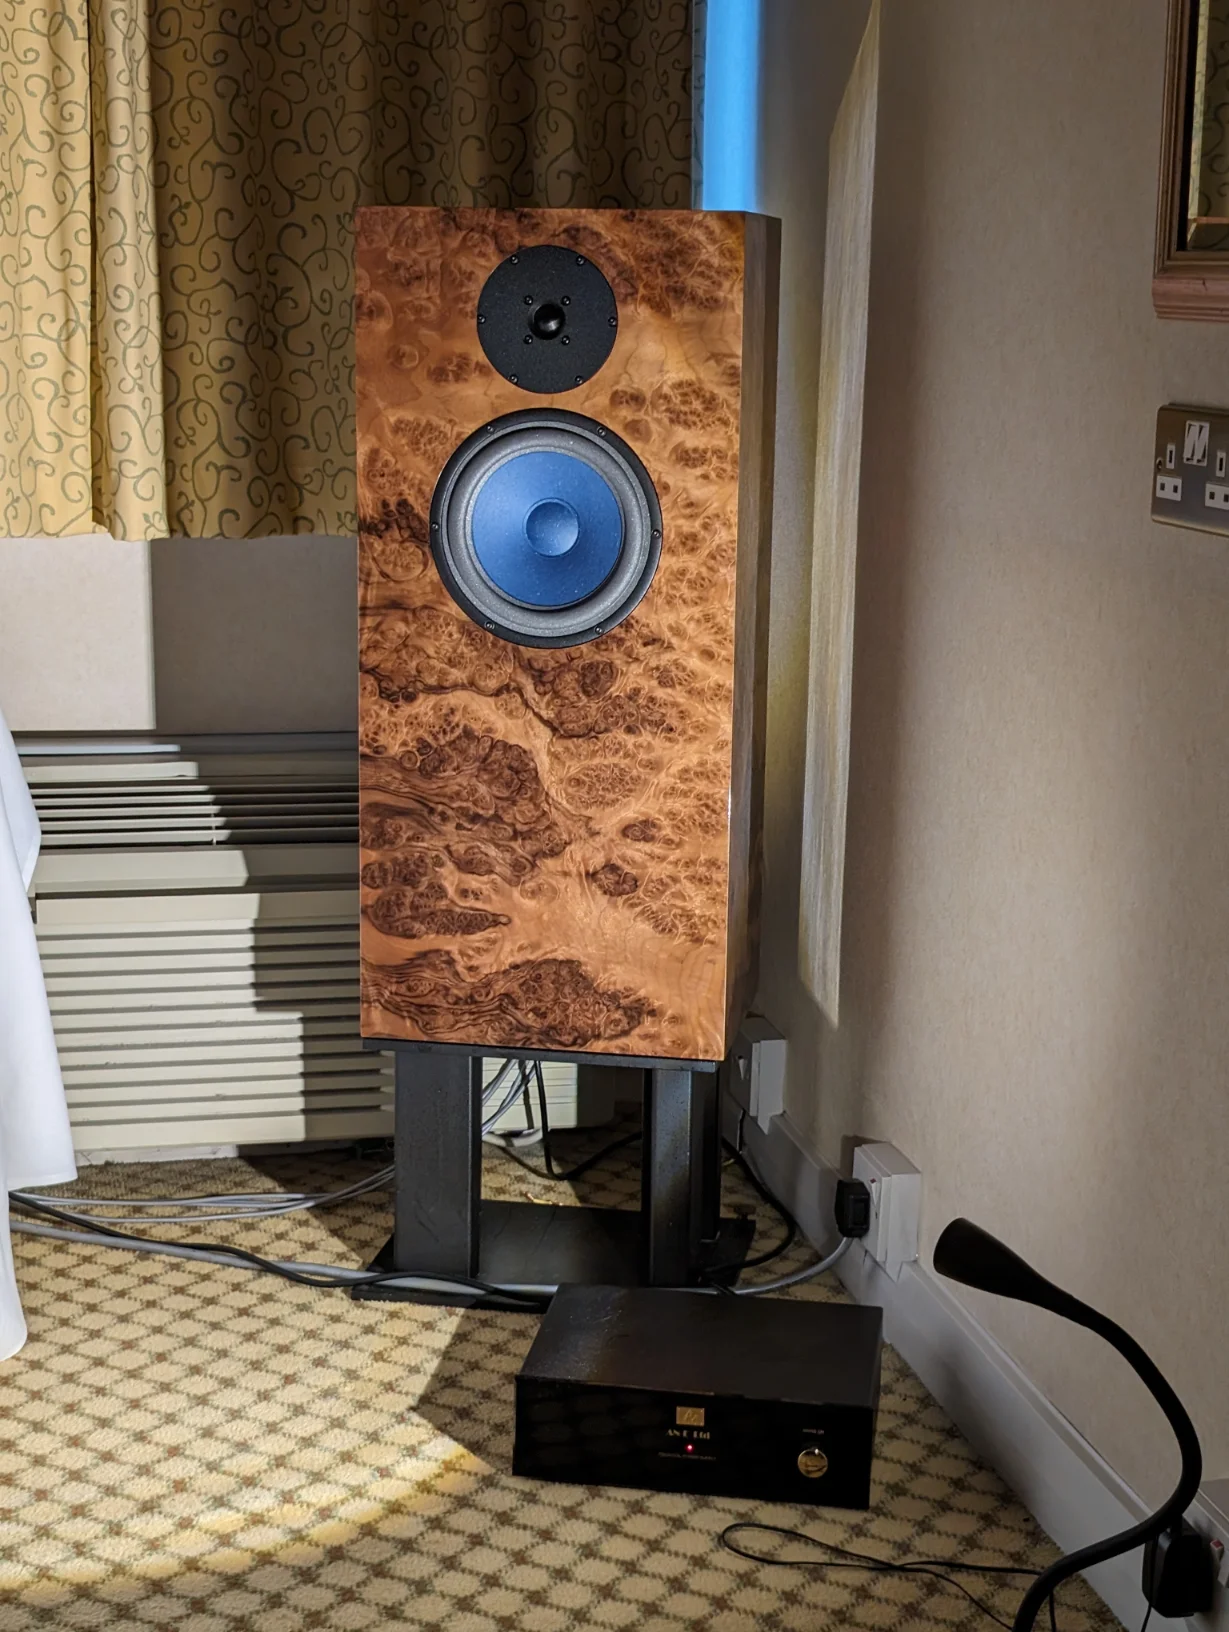 Stunning Burl Walnut finish on the AN-E’s. Could these be the best looking speaker at the show?!